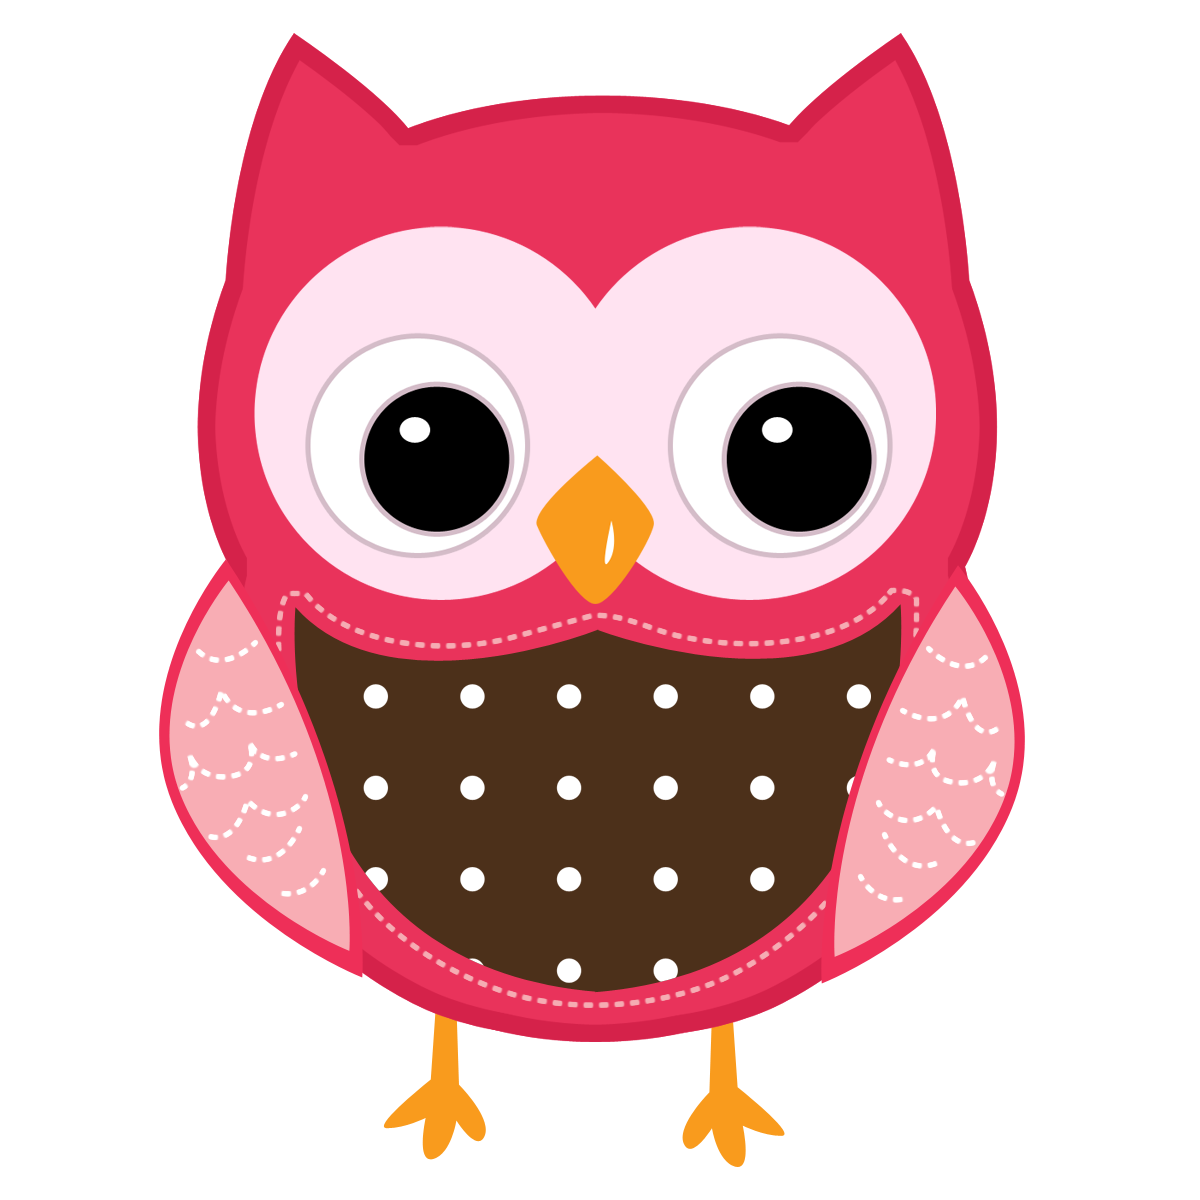 Free Owl Cartoon Png, Download Free Owl Cartoon Png png images, Free